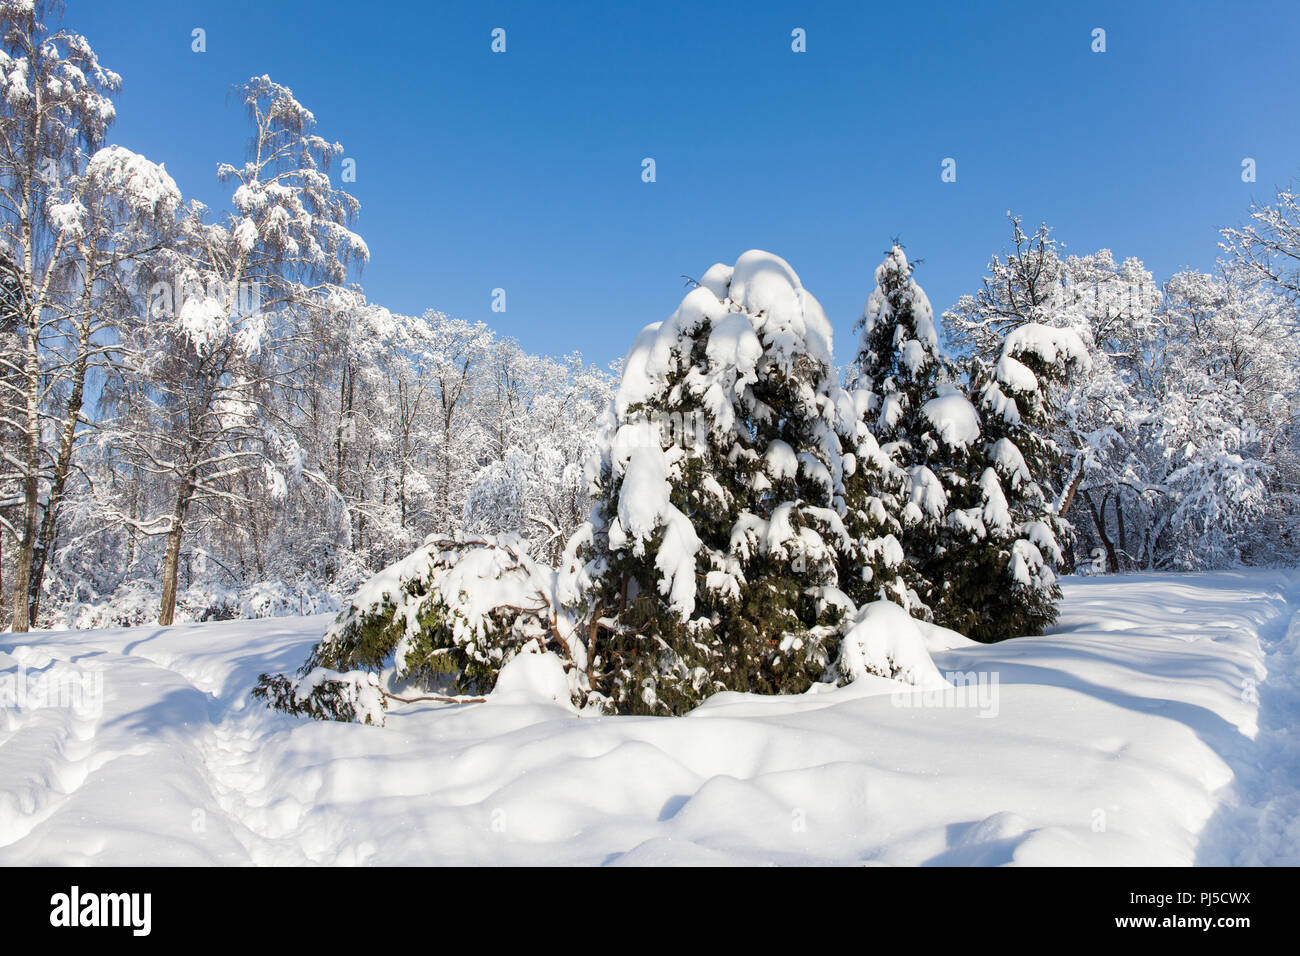 Sunny day winter forest, snow covered trees against blue sky. Cold season weather snowy landscape. Snowy xmas background. Stock Photo